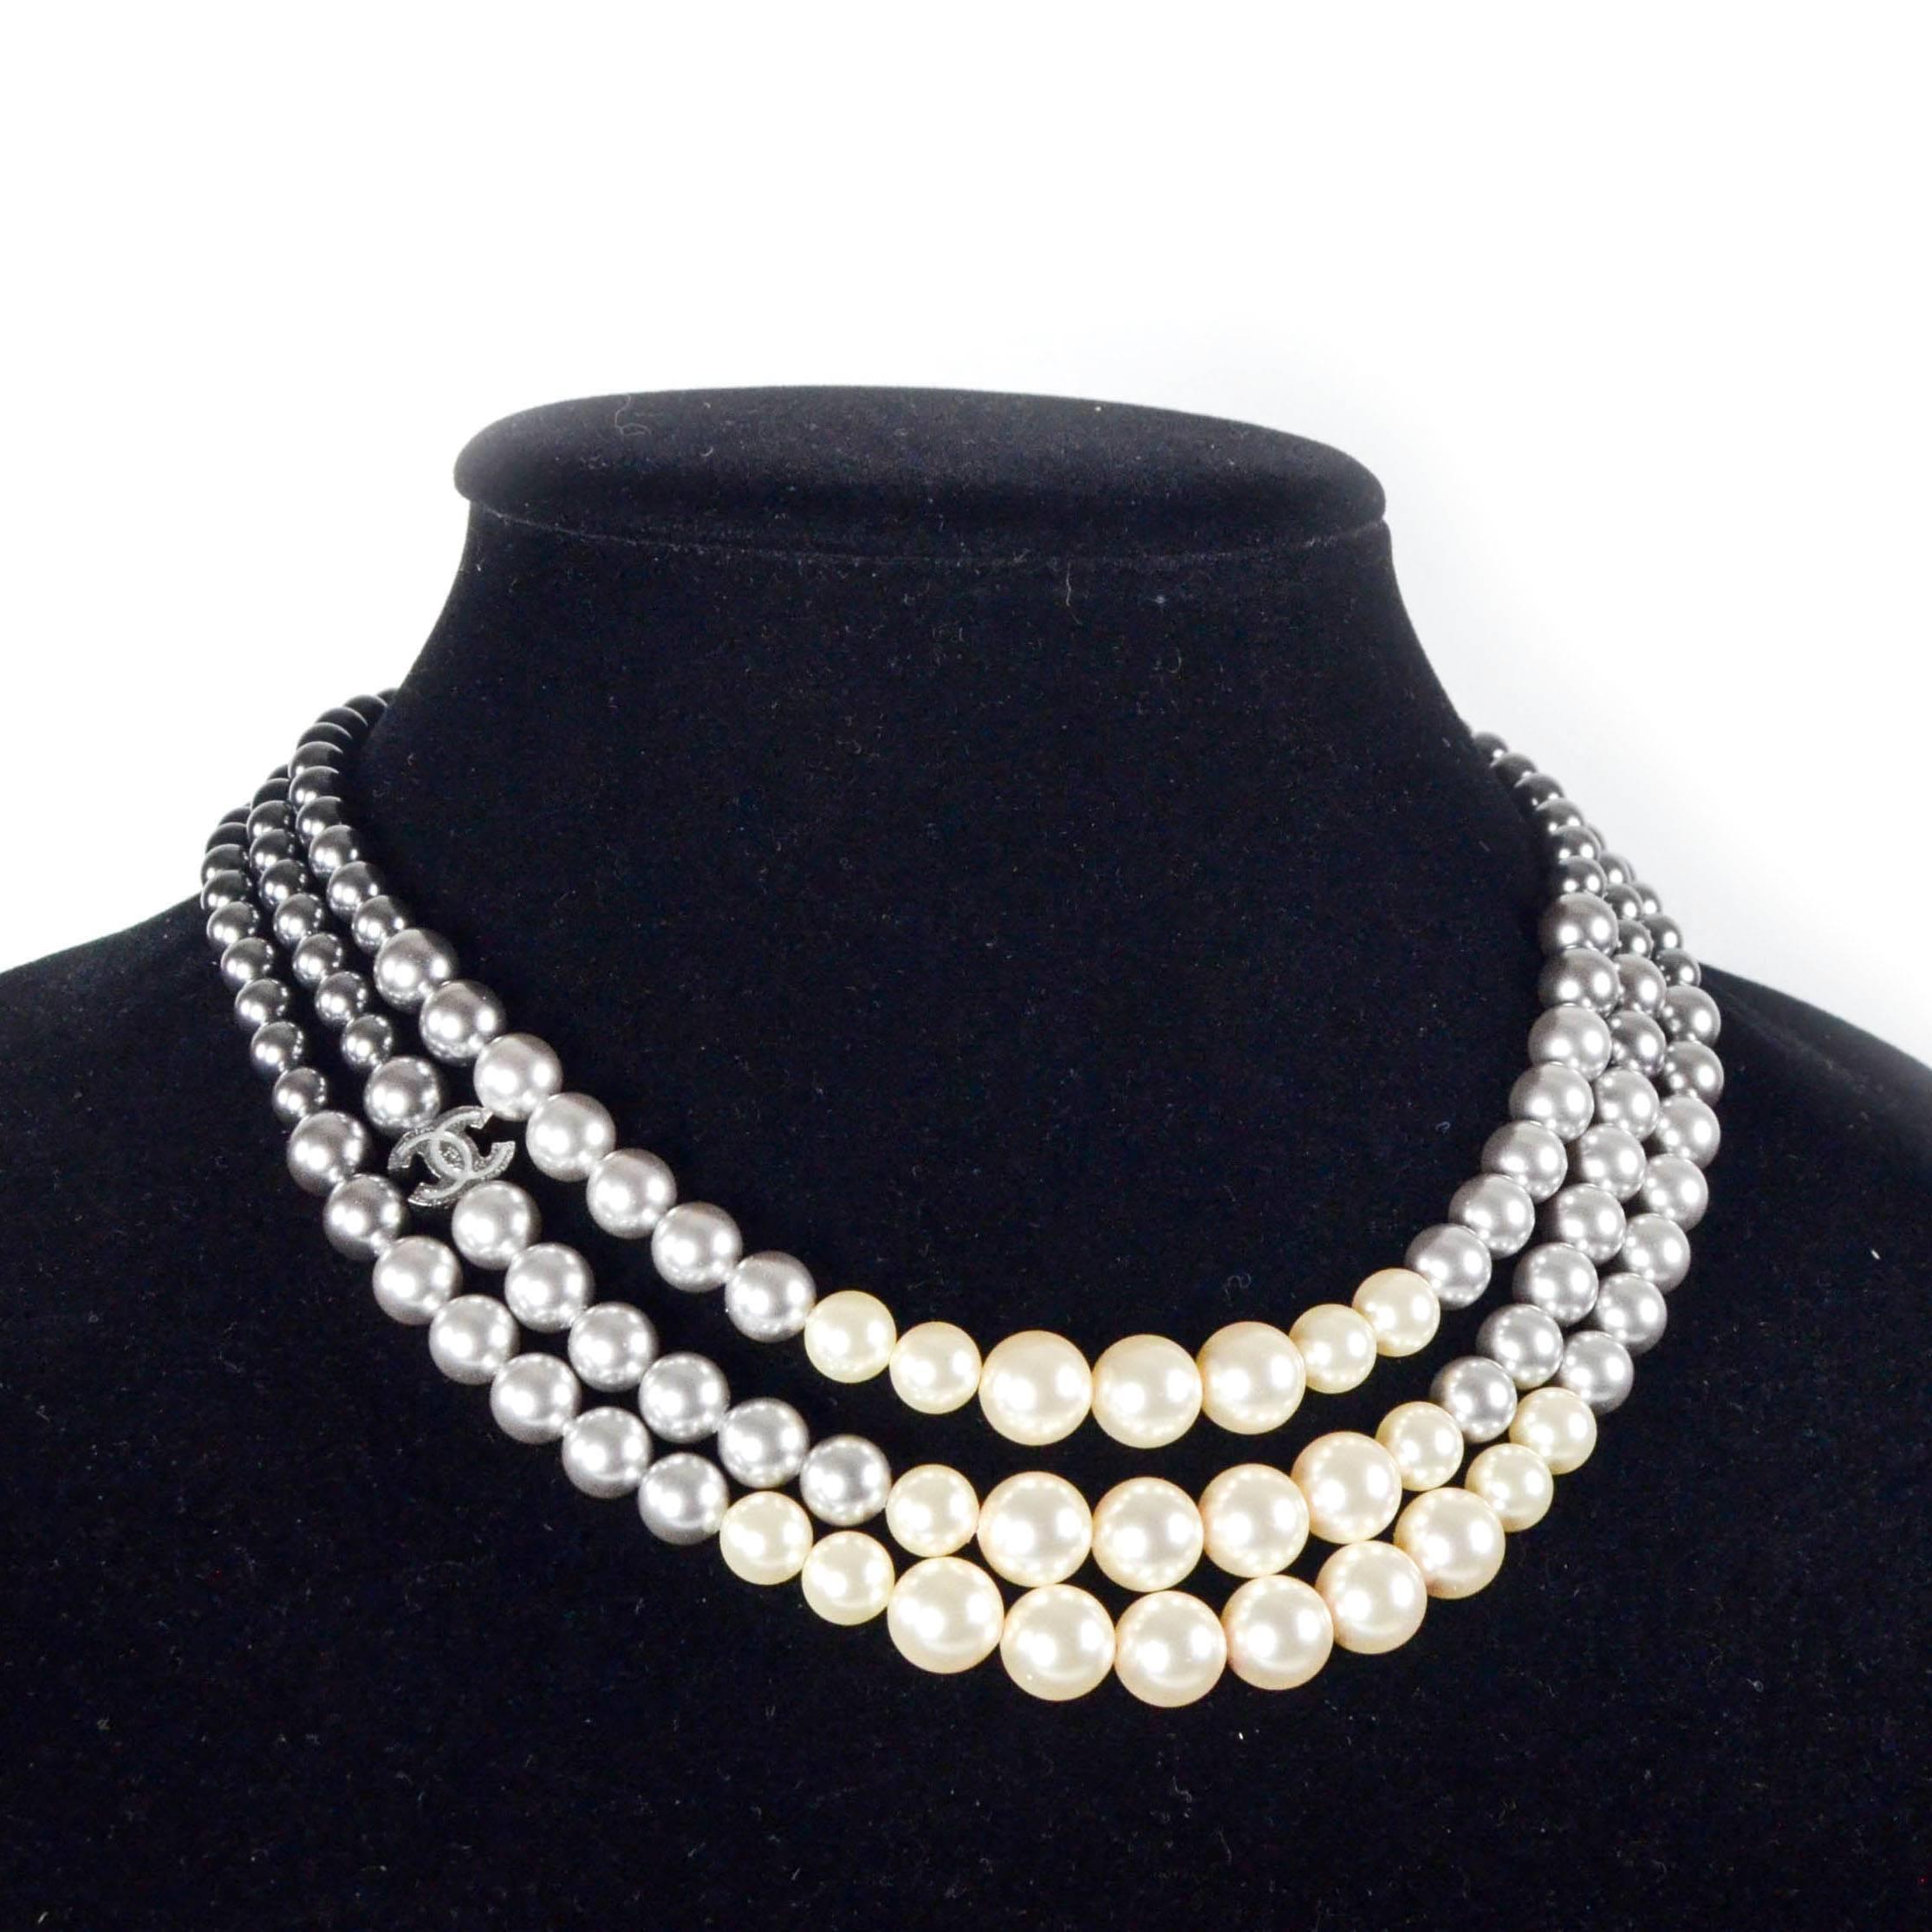 Chanel - Pearl Ombre Multistrand Gradient Necklace 

Color: Silver / Gray / White
 
Material: Pearl Beads
 
------------------------------------------------------------
 
Details:
 
- silver tone hardware

- 3 strands

- dark gray to white ombre